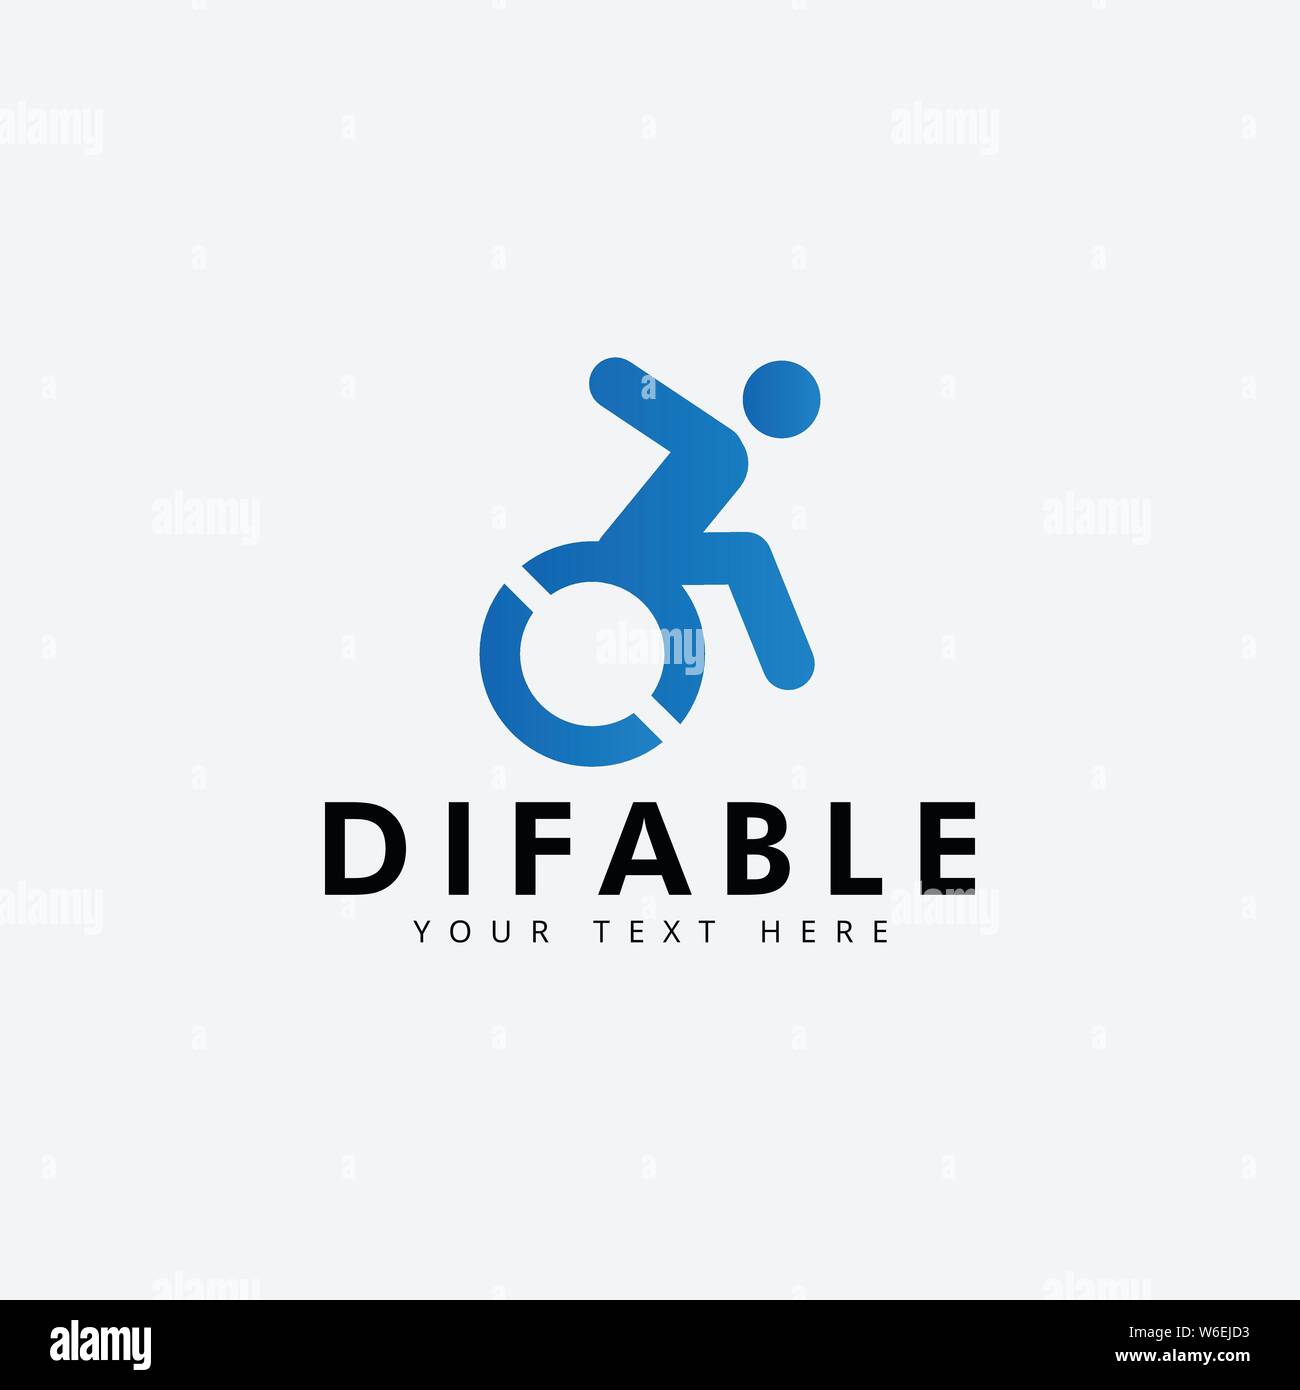 Difable different ability logo design template isolated Stock Vector